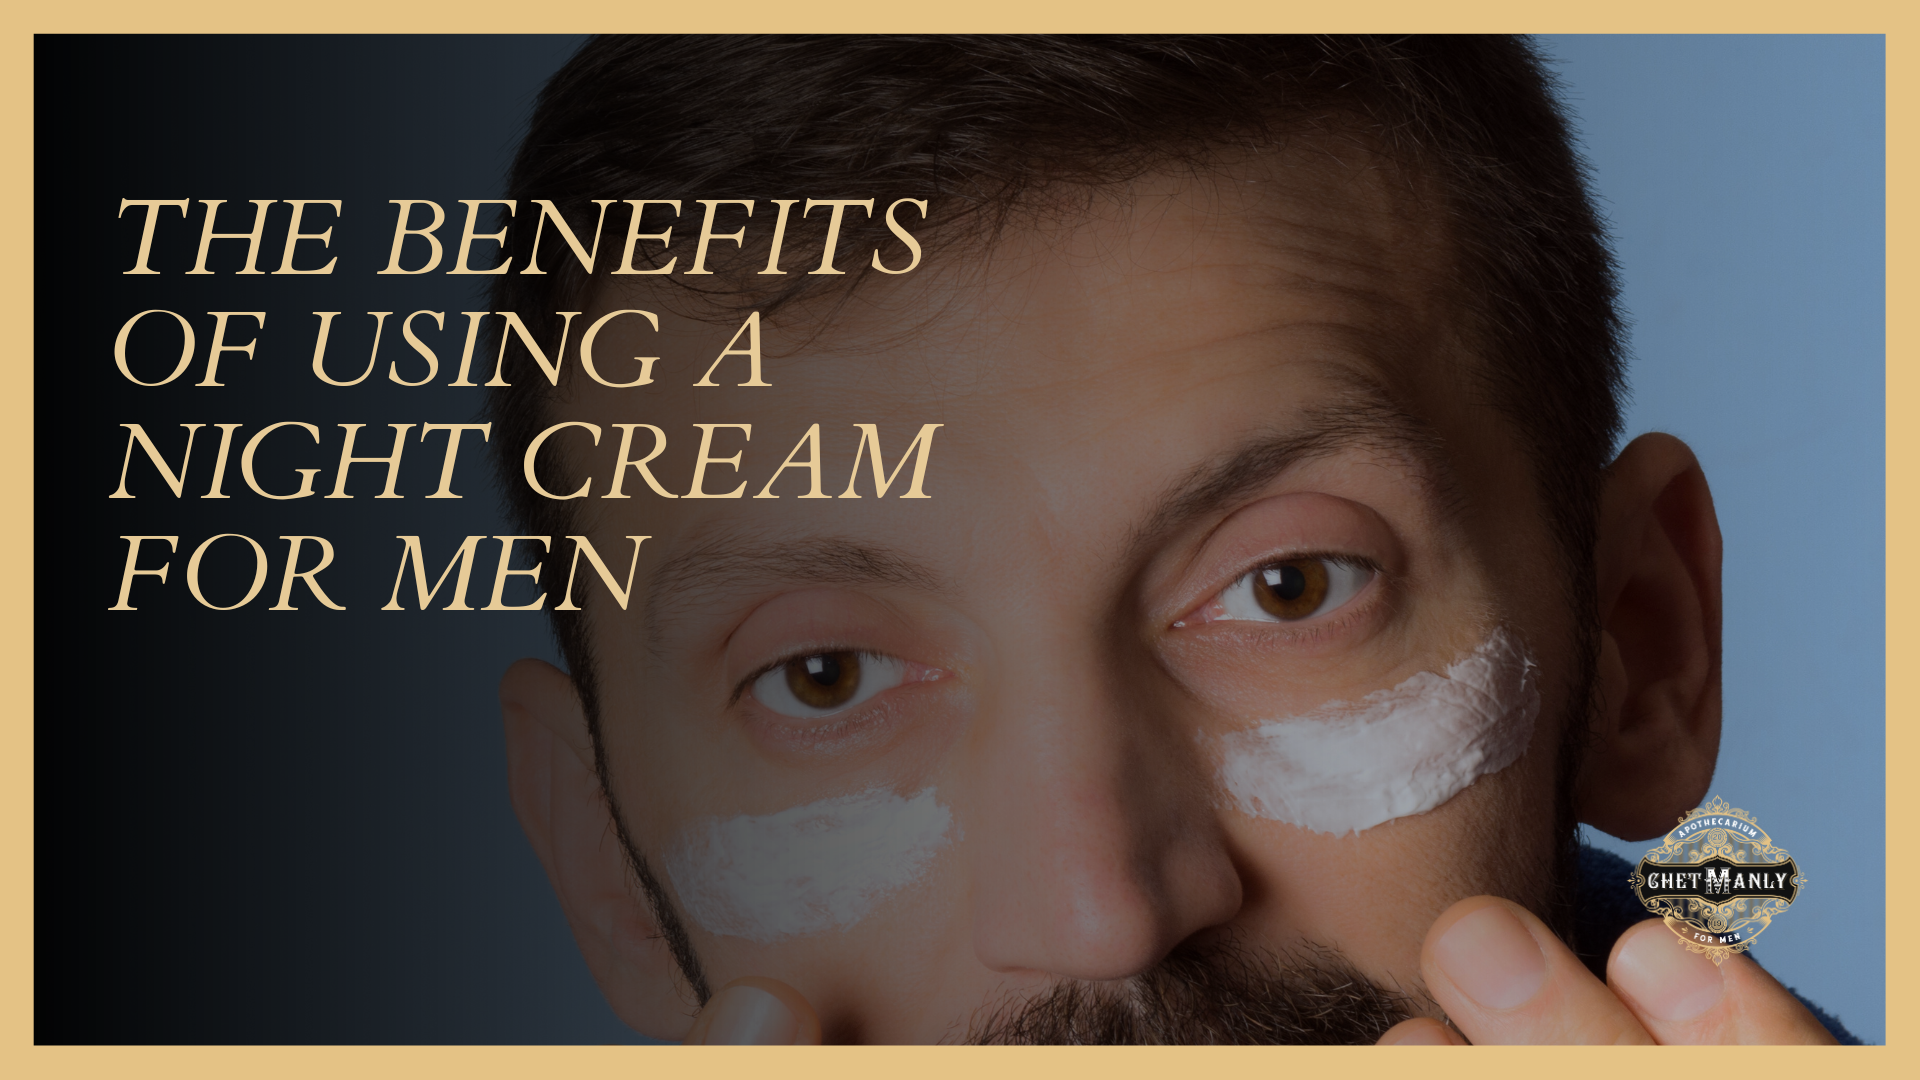 The Benefits of Using a Night Cream for Men